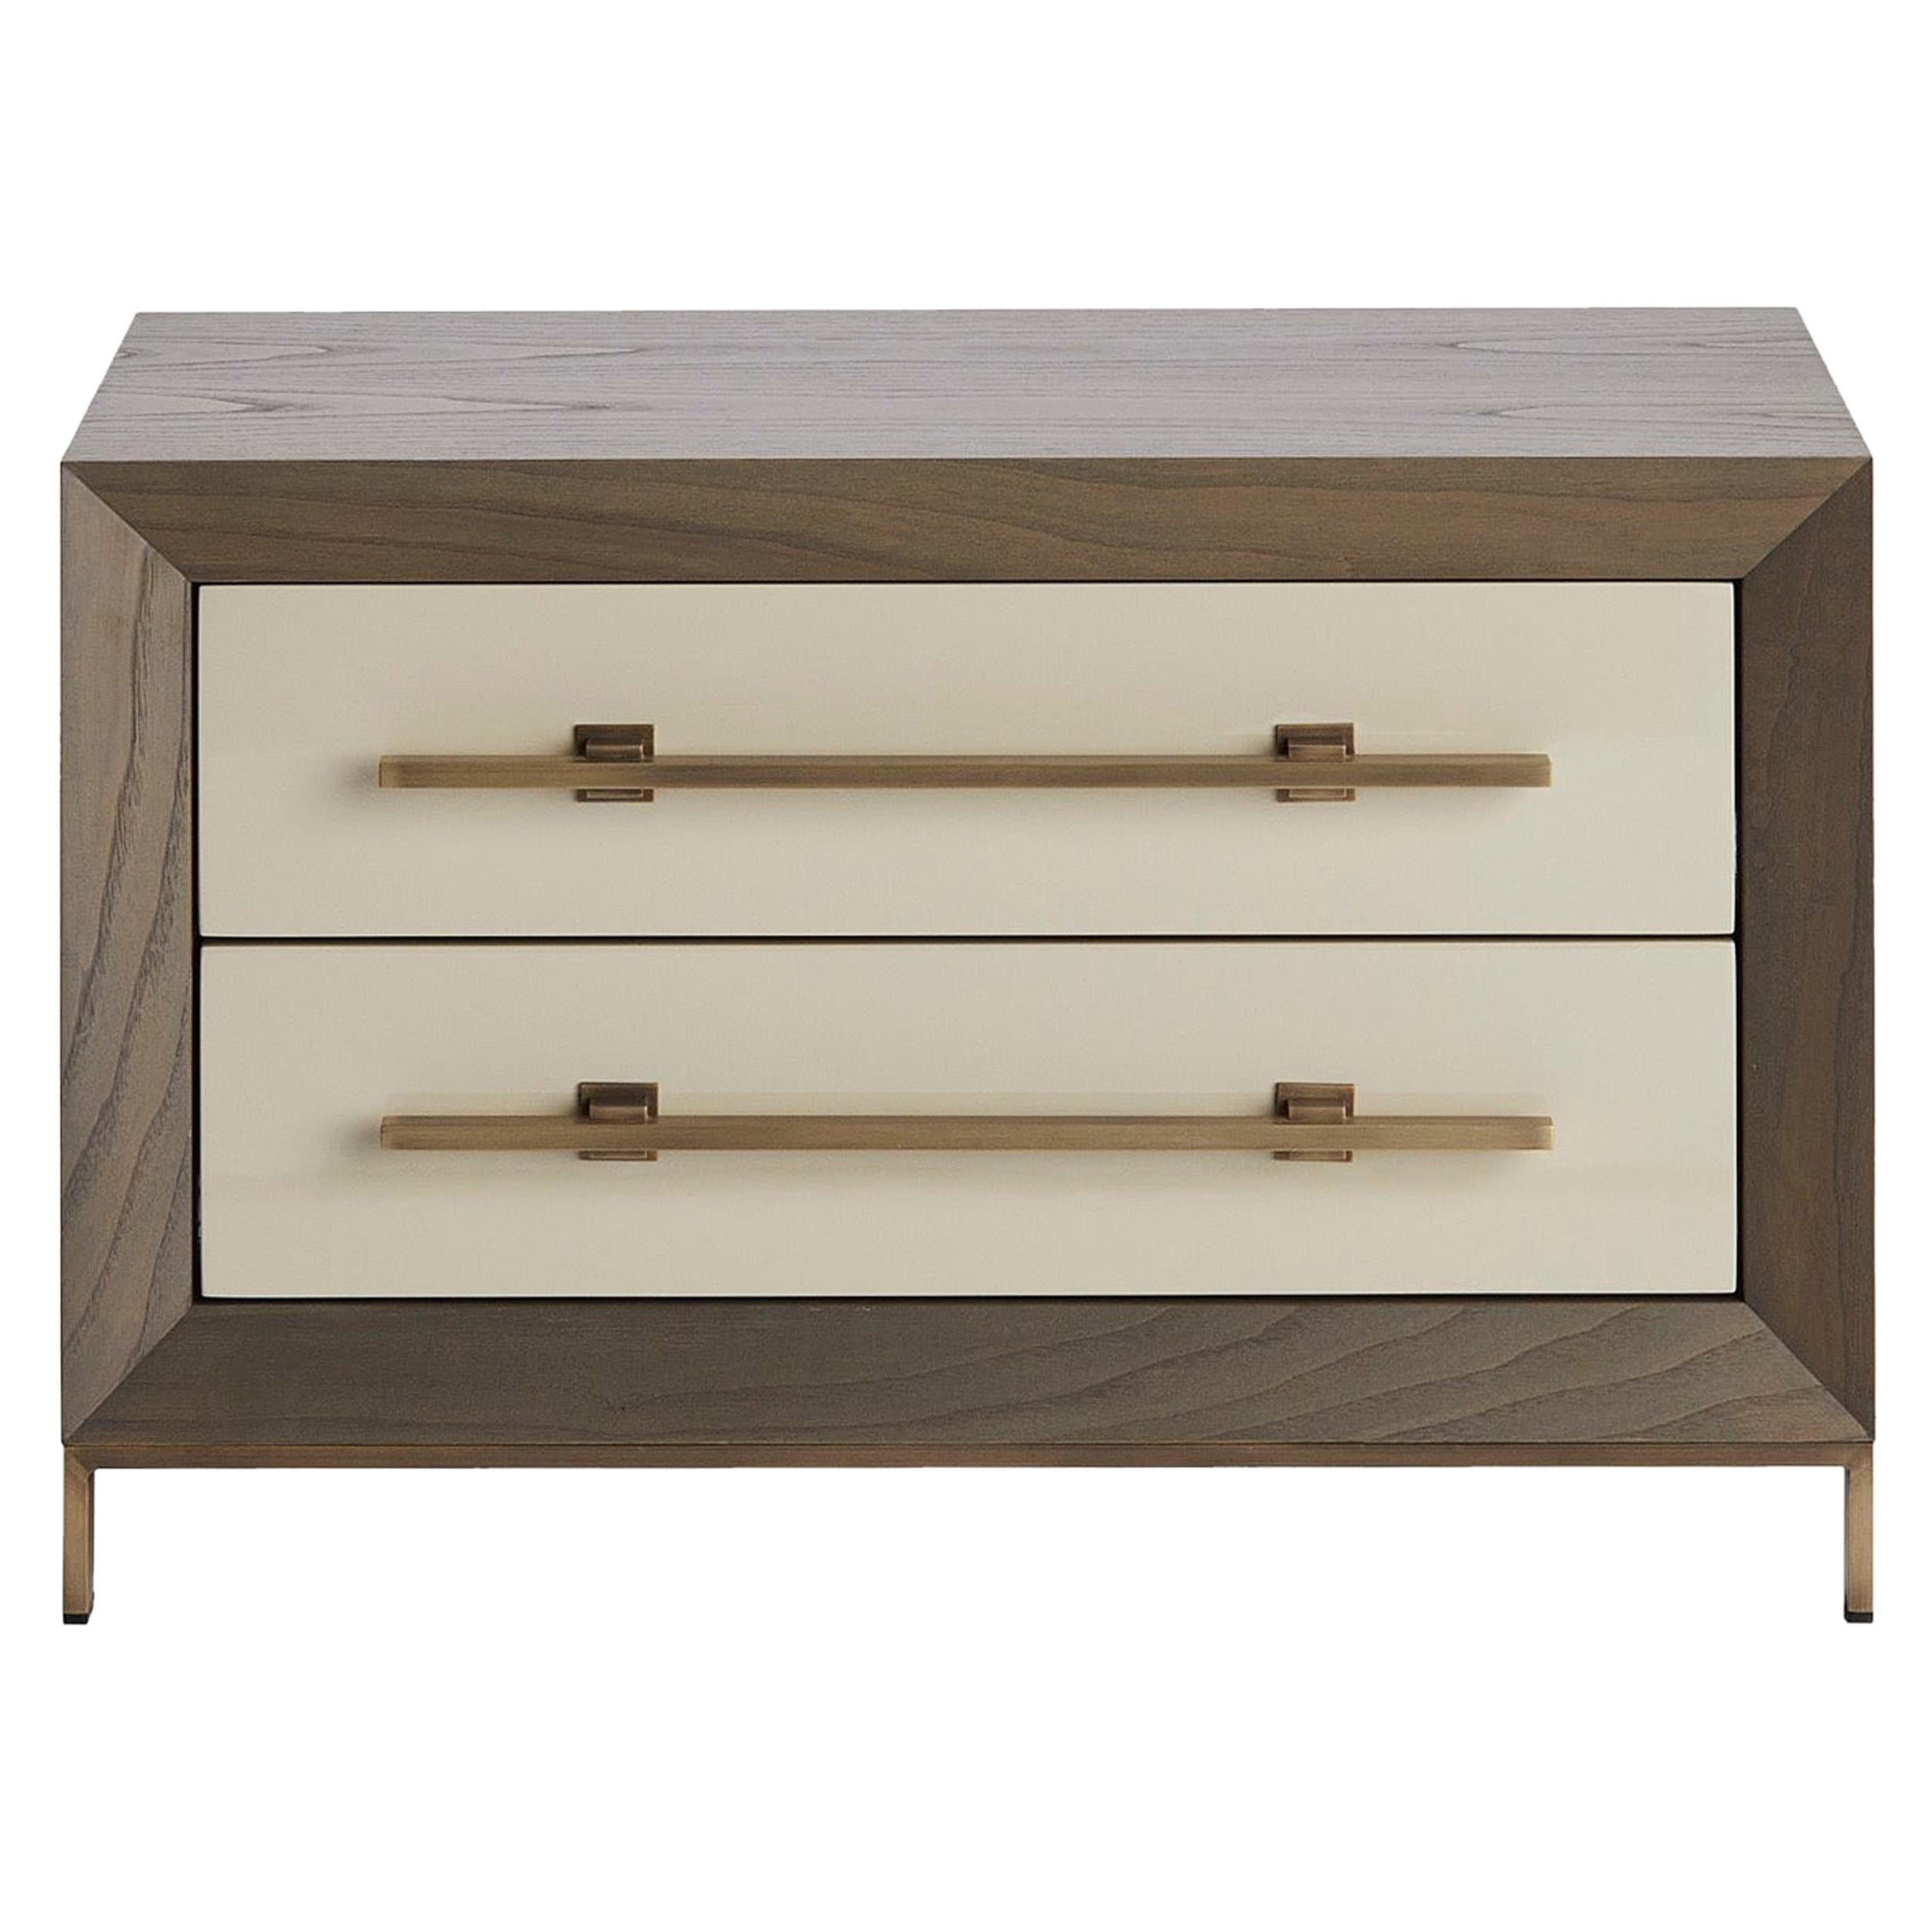 MAGNA Nightstand in Chestnut Structure and Lacquered Drawers